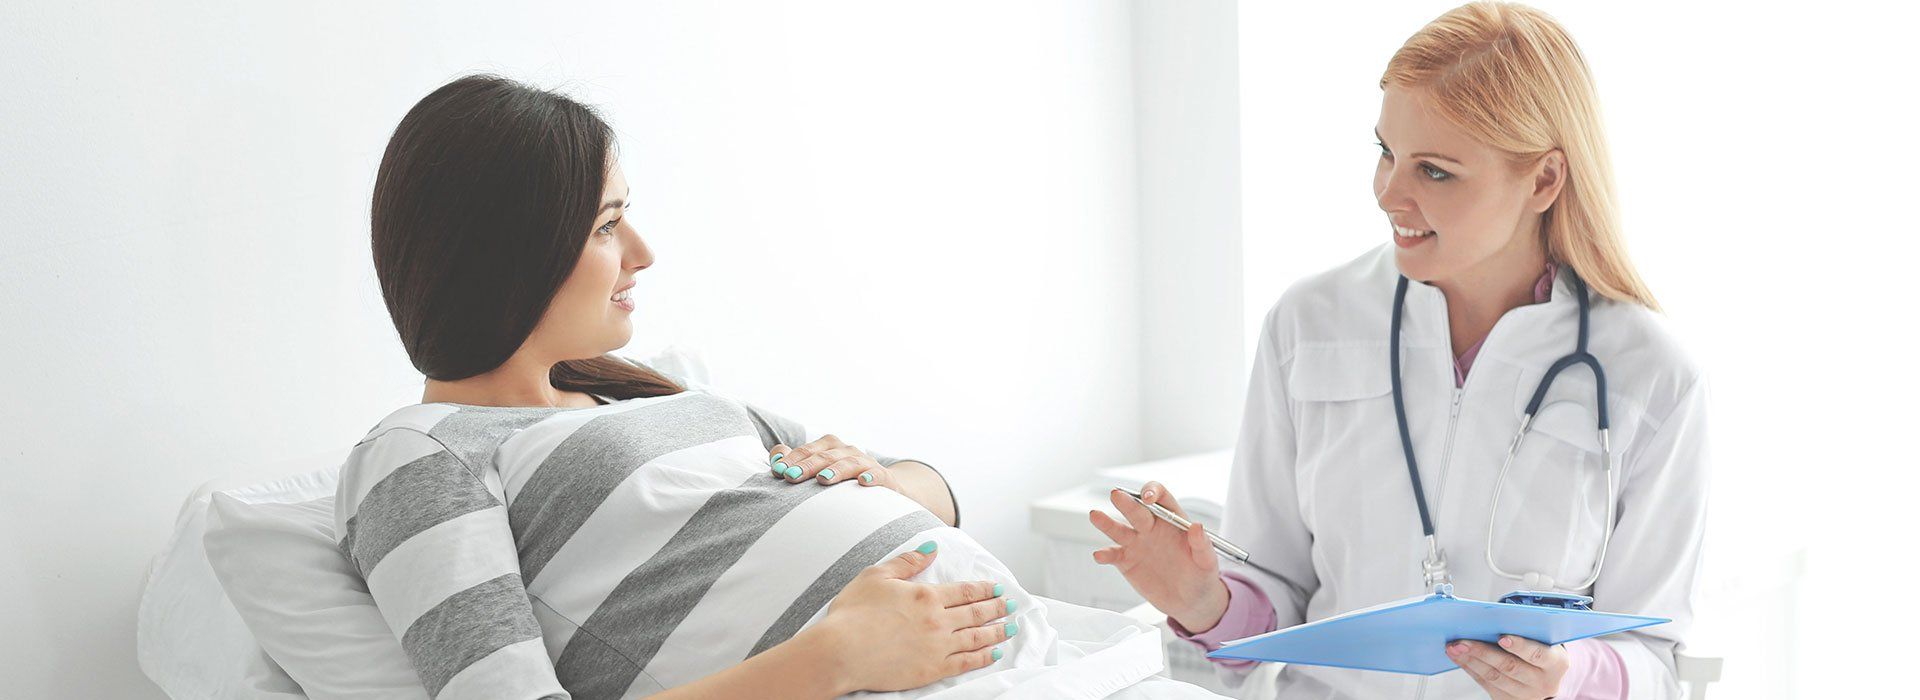 Women's Health Care and Gynecology Services